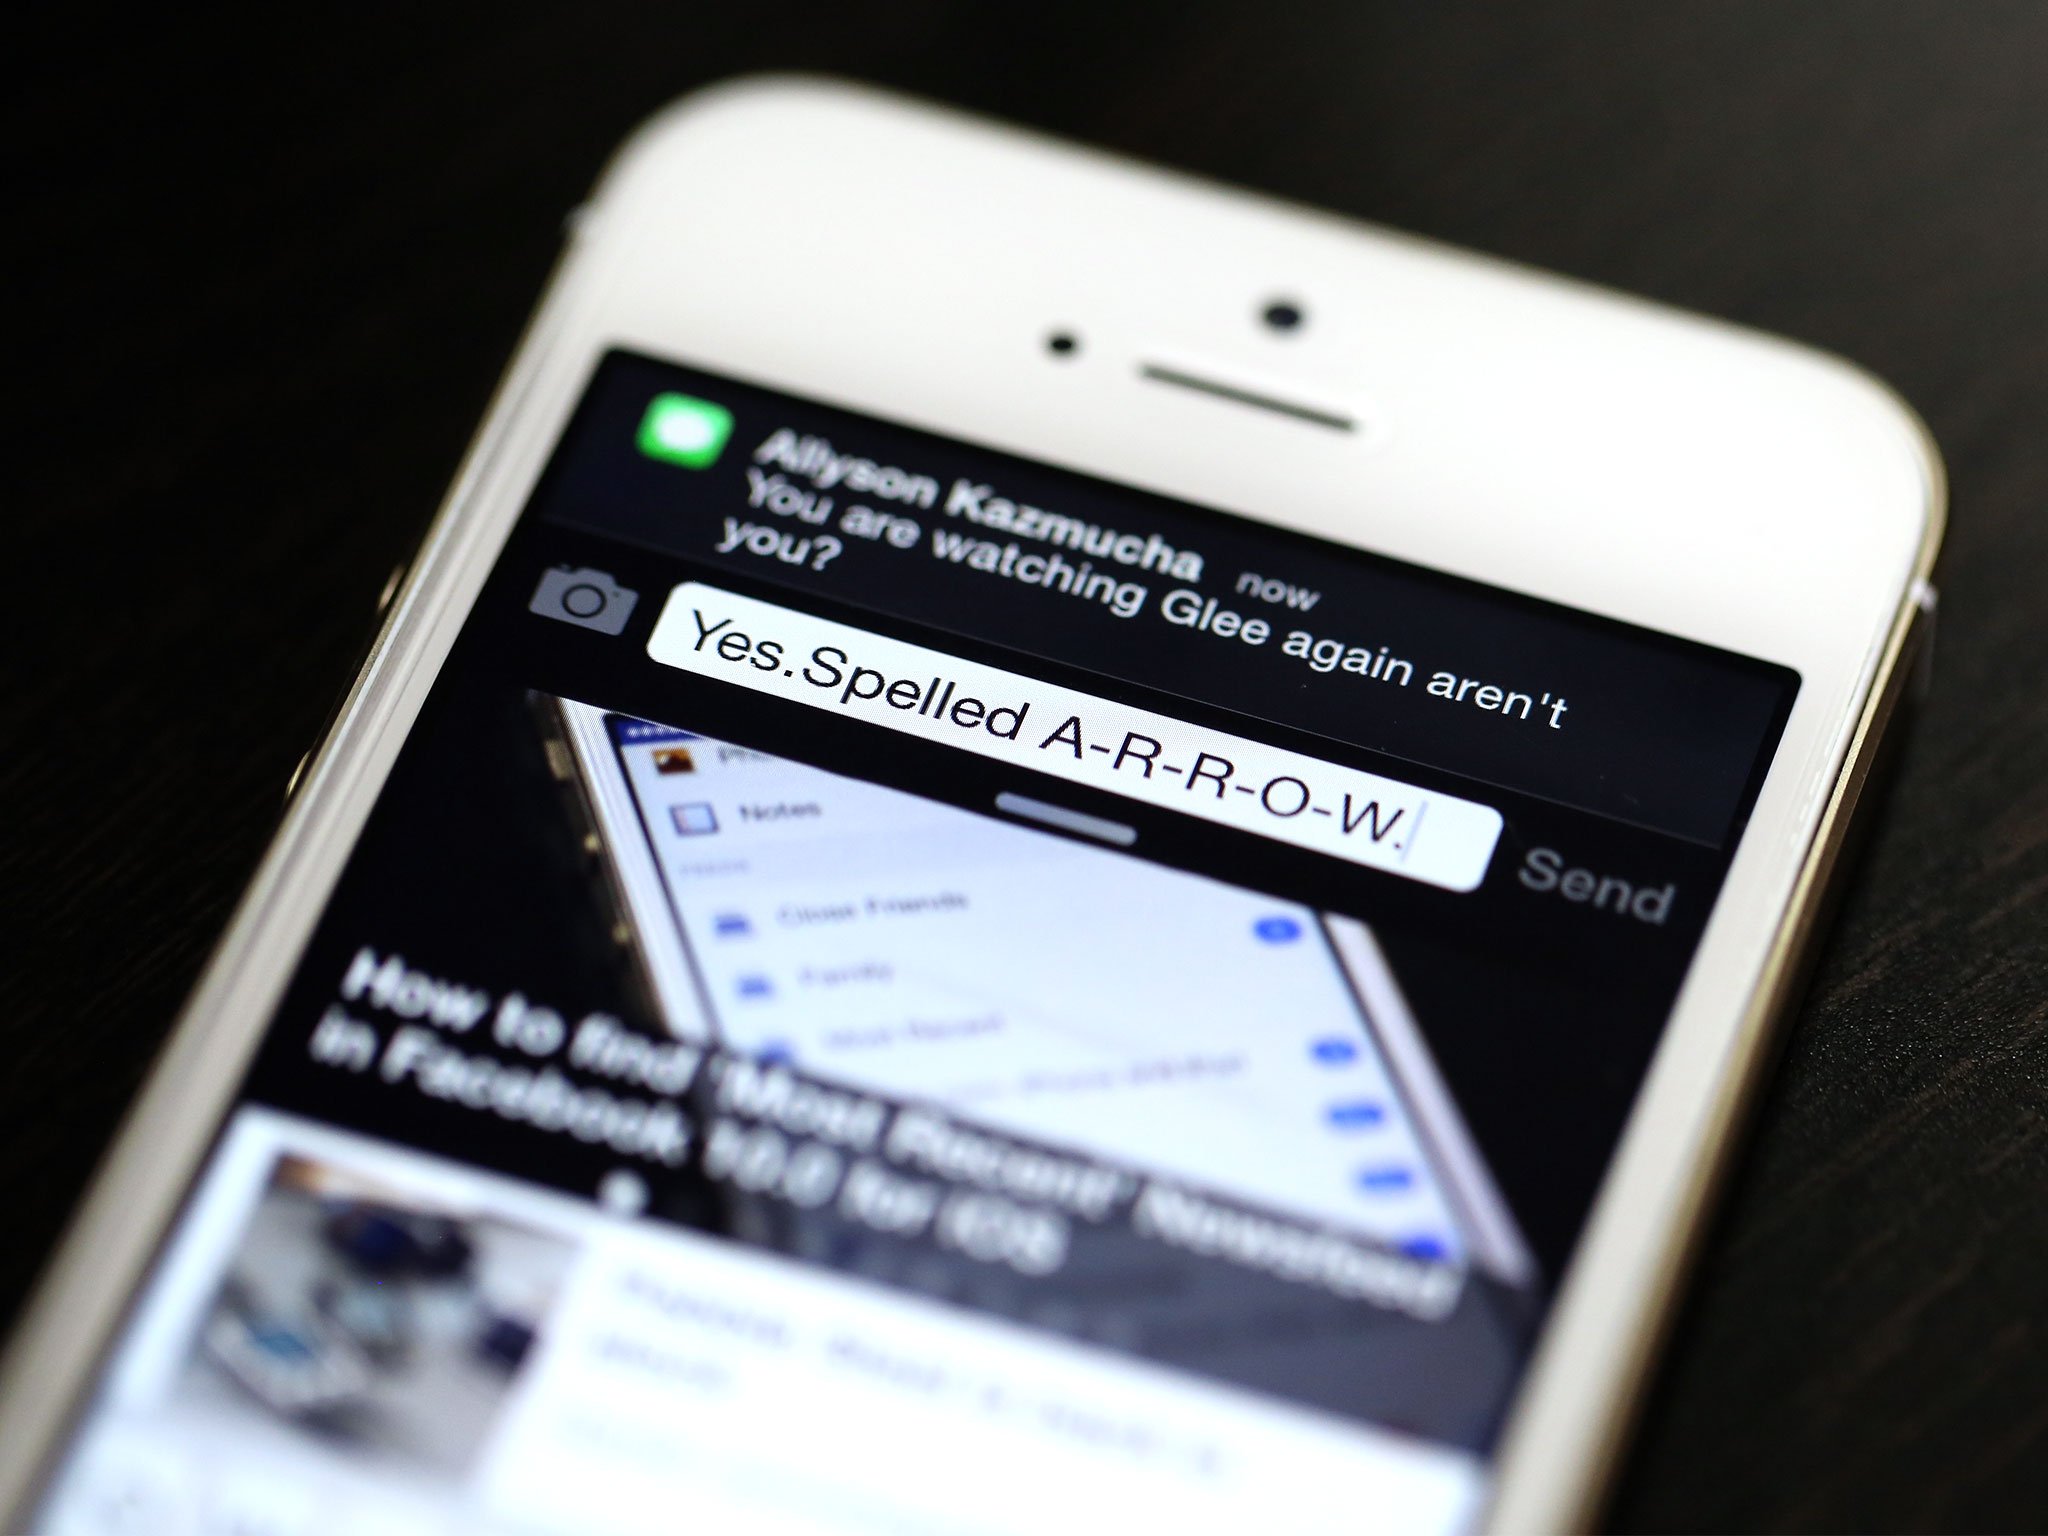 iOS 8 wants: Interactive notifications and push interface redux